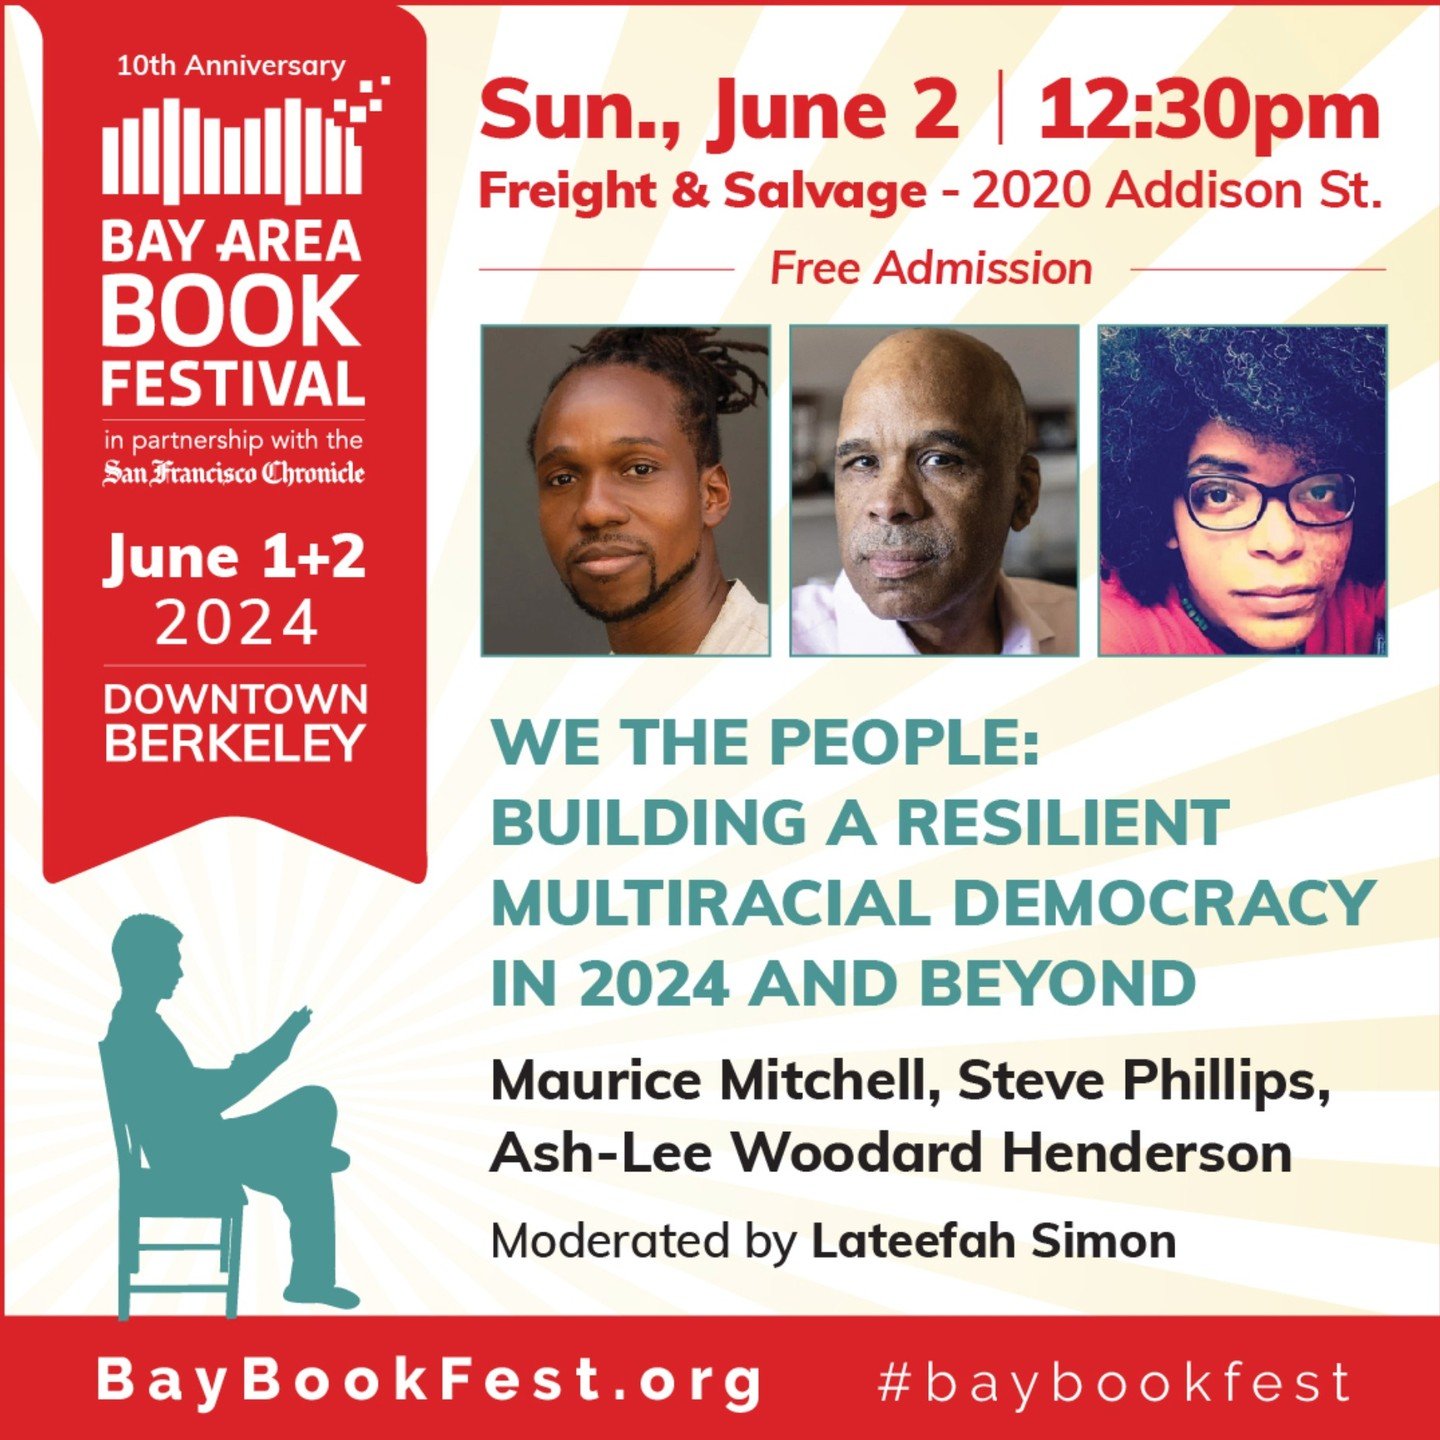 JOIN US!

At the @baybookfest, @sphilli @workingfamilies' @mauricewfp &amp; @highlandercenter's @_ashdashlee_ will discuss how we build a truly multiracial democracy in 2024. 

Congressional candidate &amp; former pod guest @lateefahforcongress will 